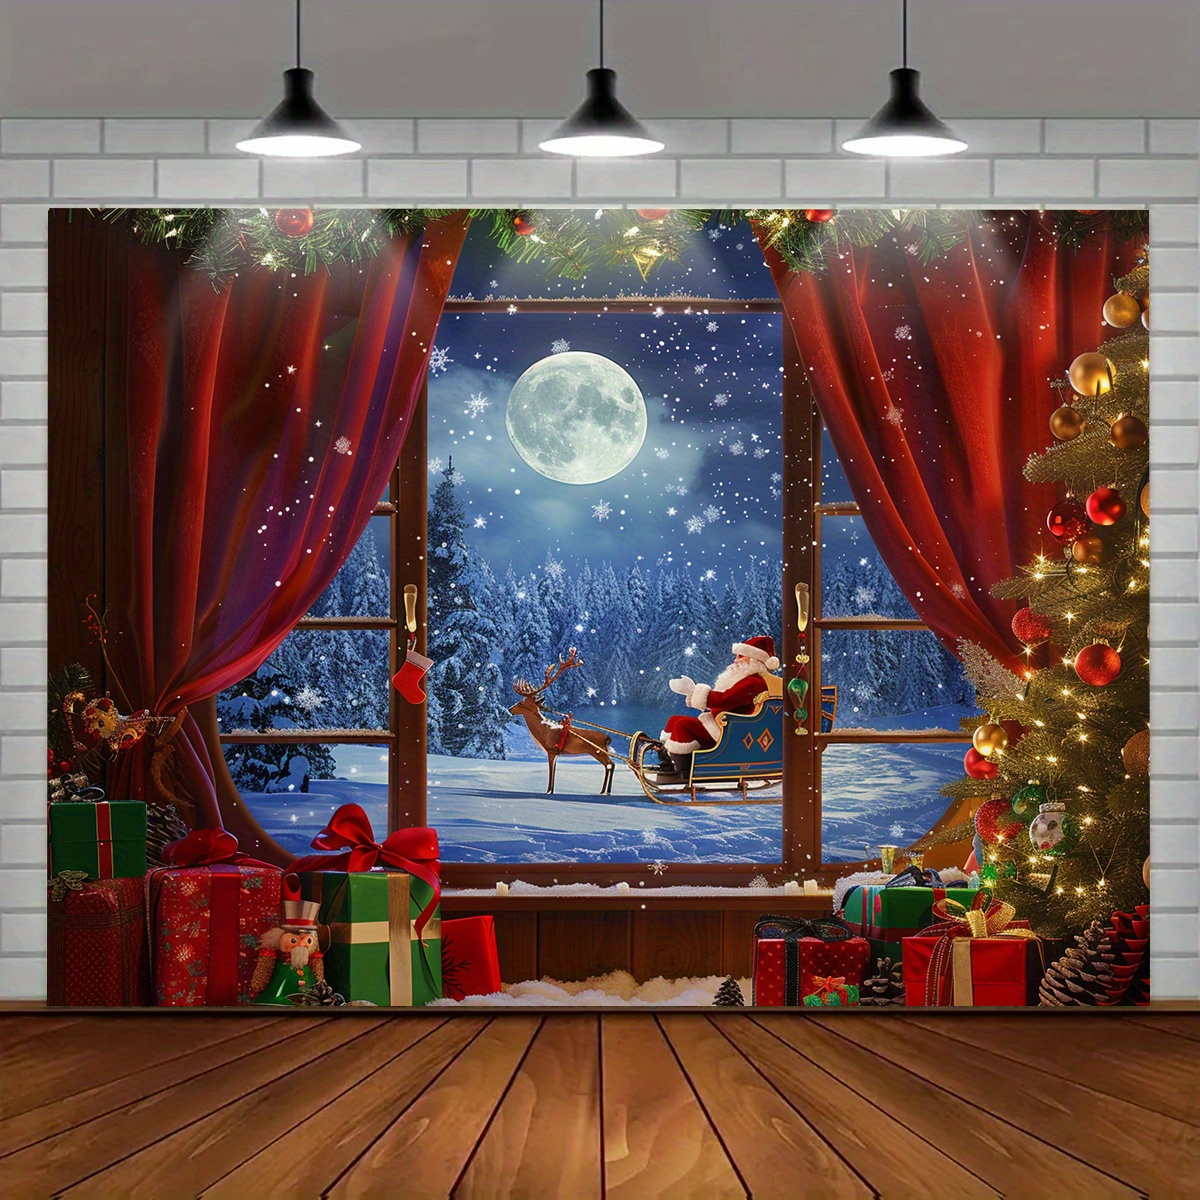 

Christmas Wonderland Window Backdrop - 1pc Polyester Photography Background With Xmas Tree, Santa Claus, Snow & Moon - Perfect For Holiday Parties & Home Decor